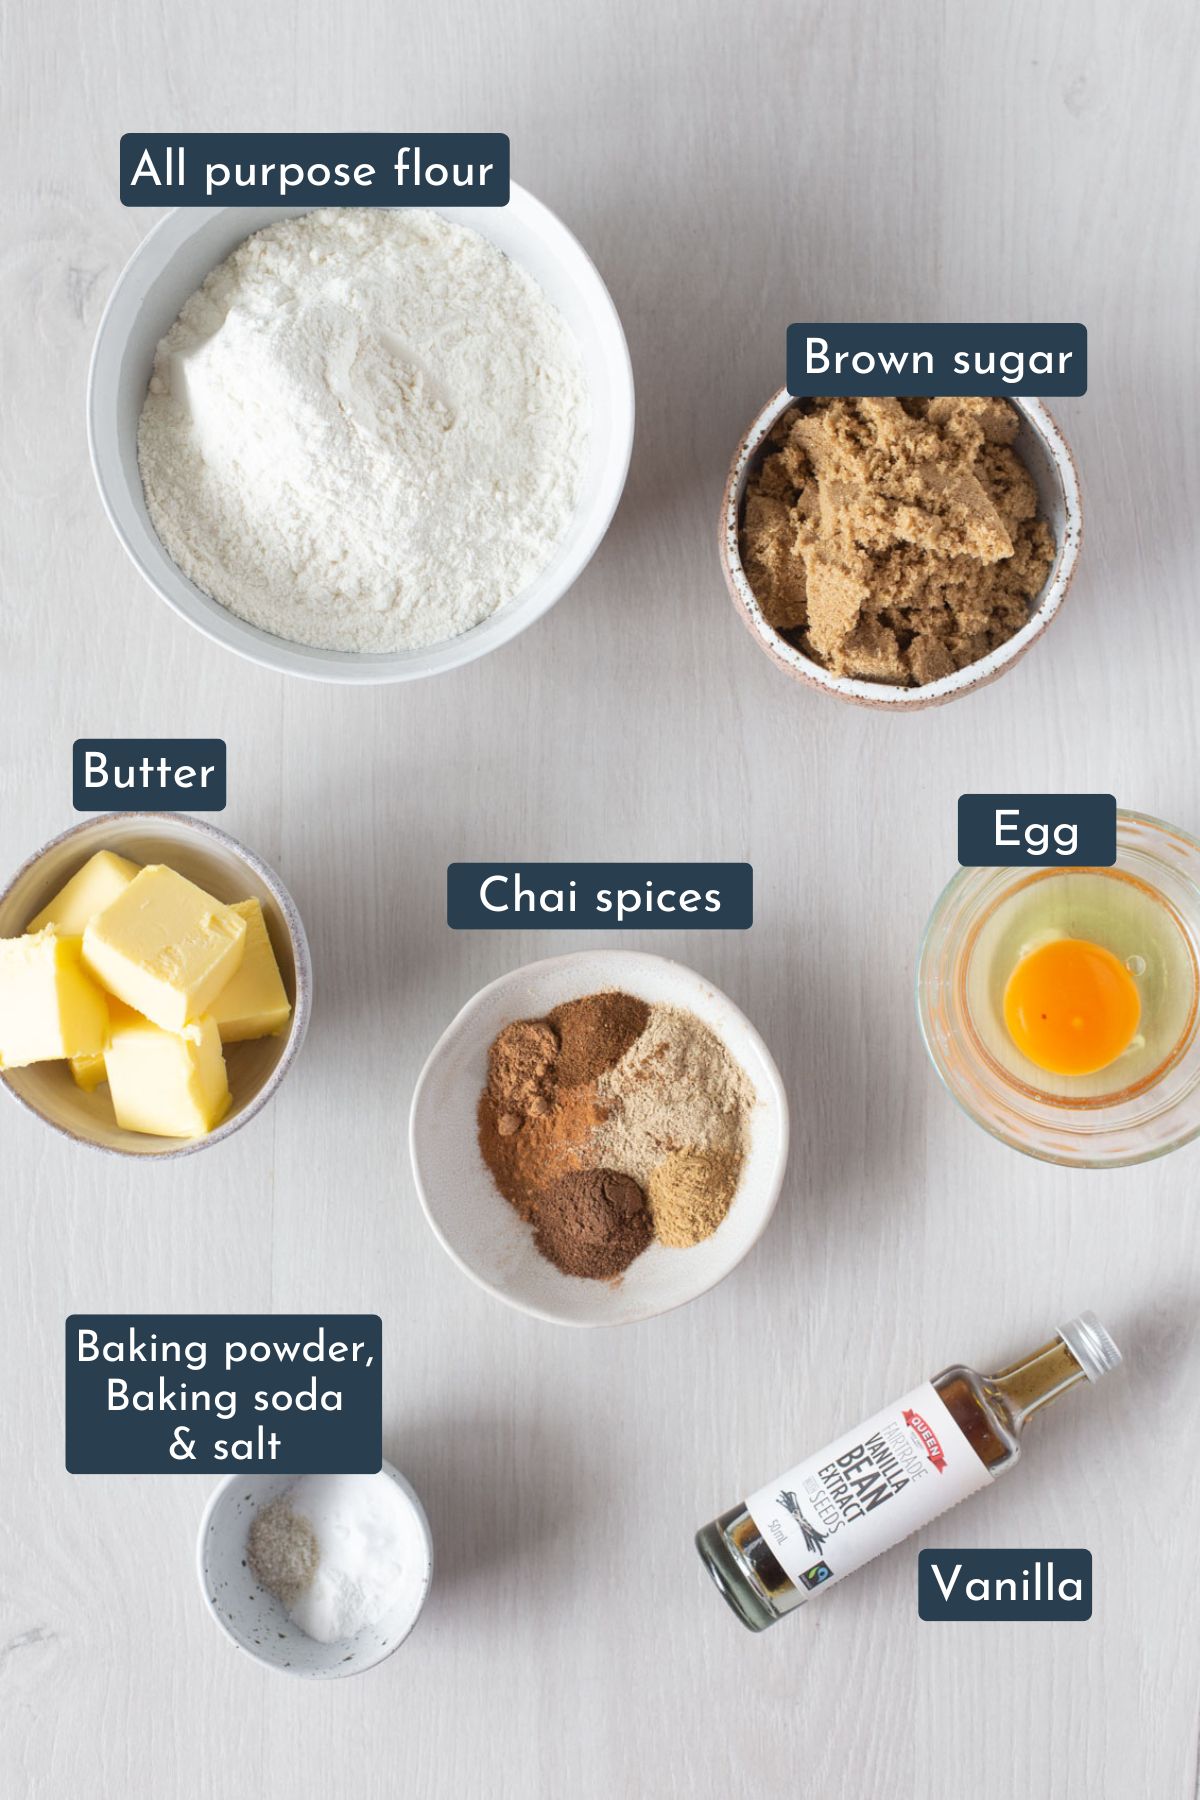 The ingredients you need to make this recipe are all purpose flour, brown sugar, unsalted butter, chai spices, egg, baking powder, baking soda, salt, and vanilla.